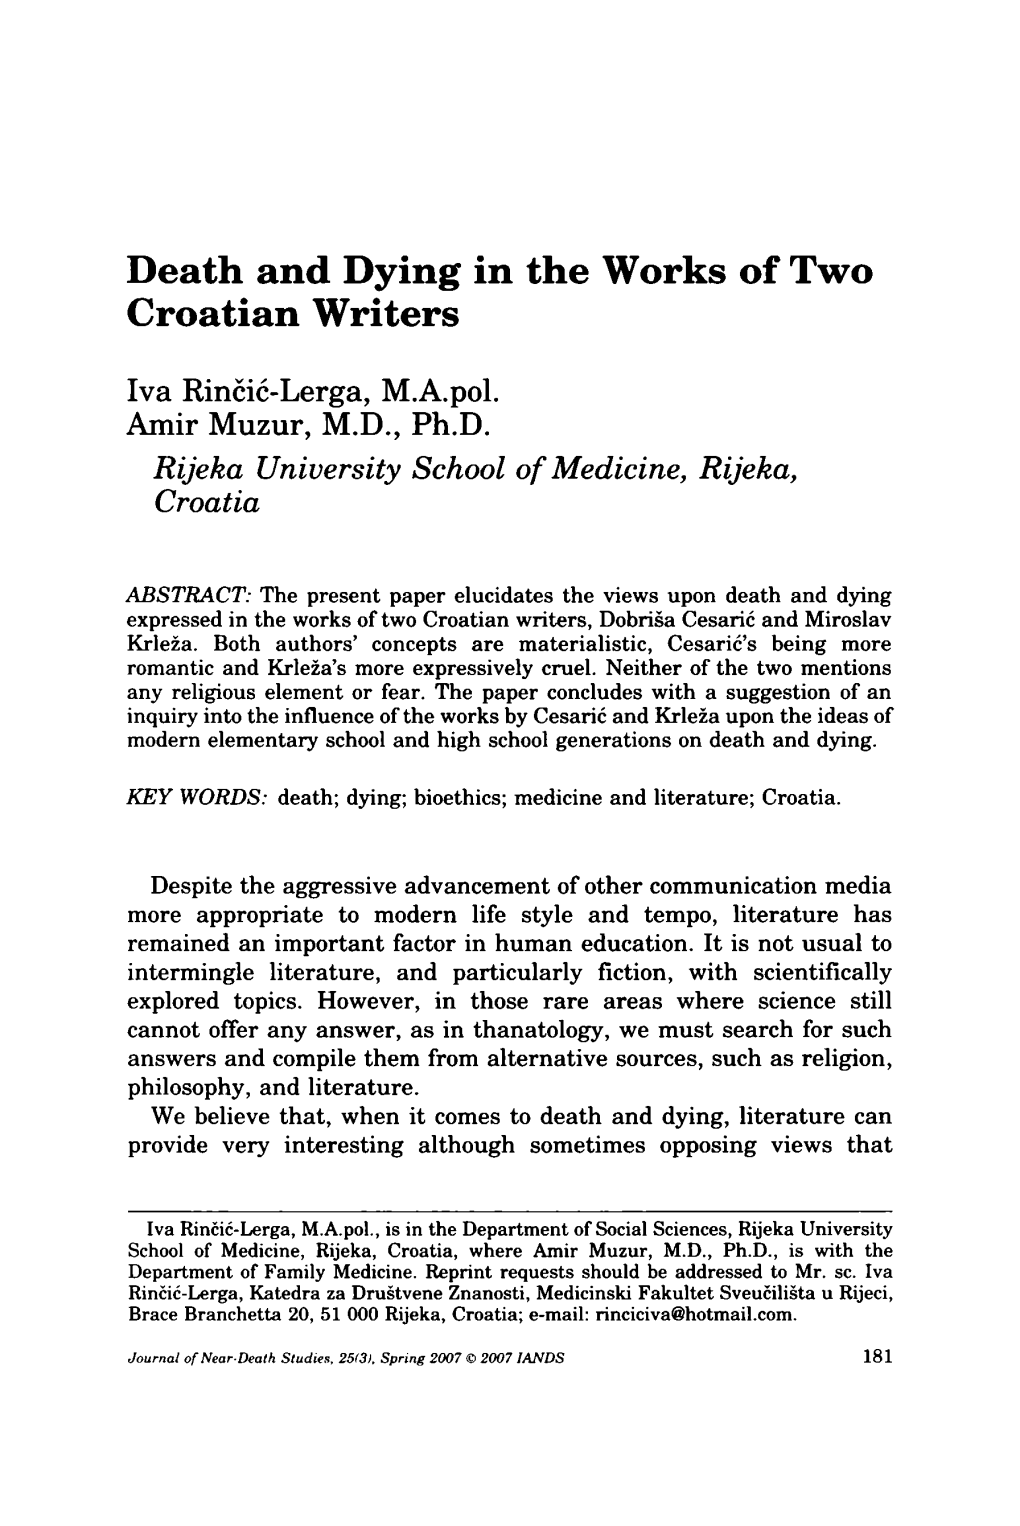 Death and Dying in the Works of Two Croatian Writers